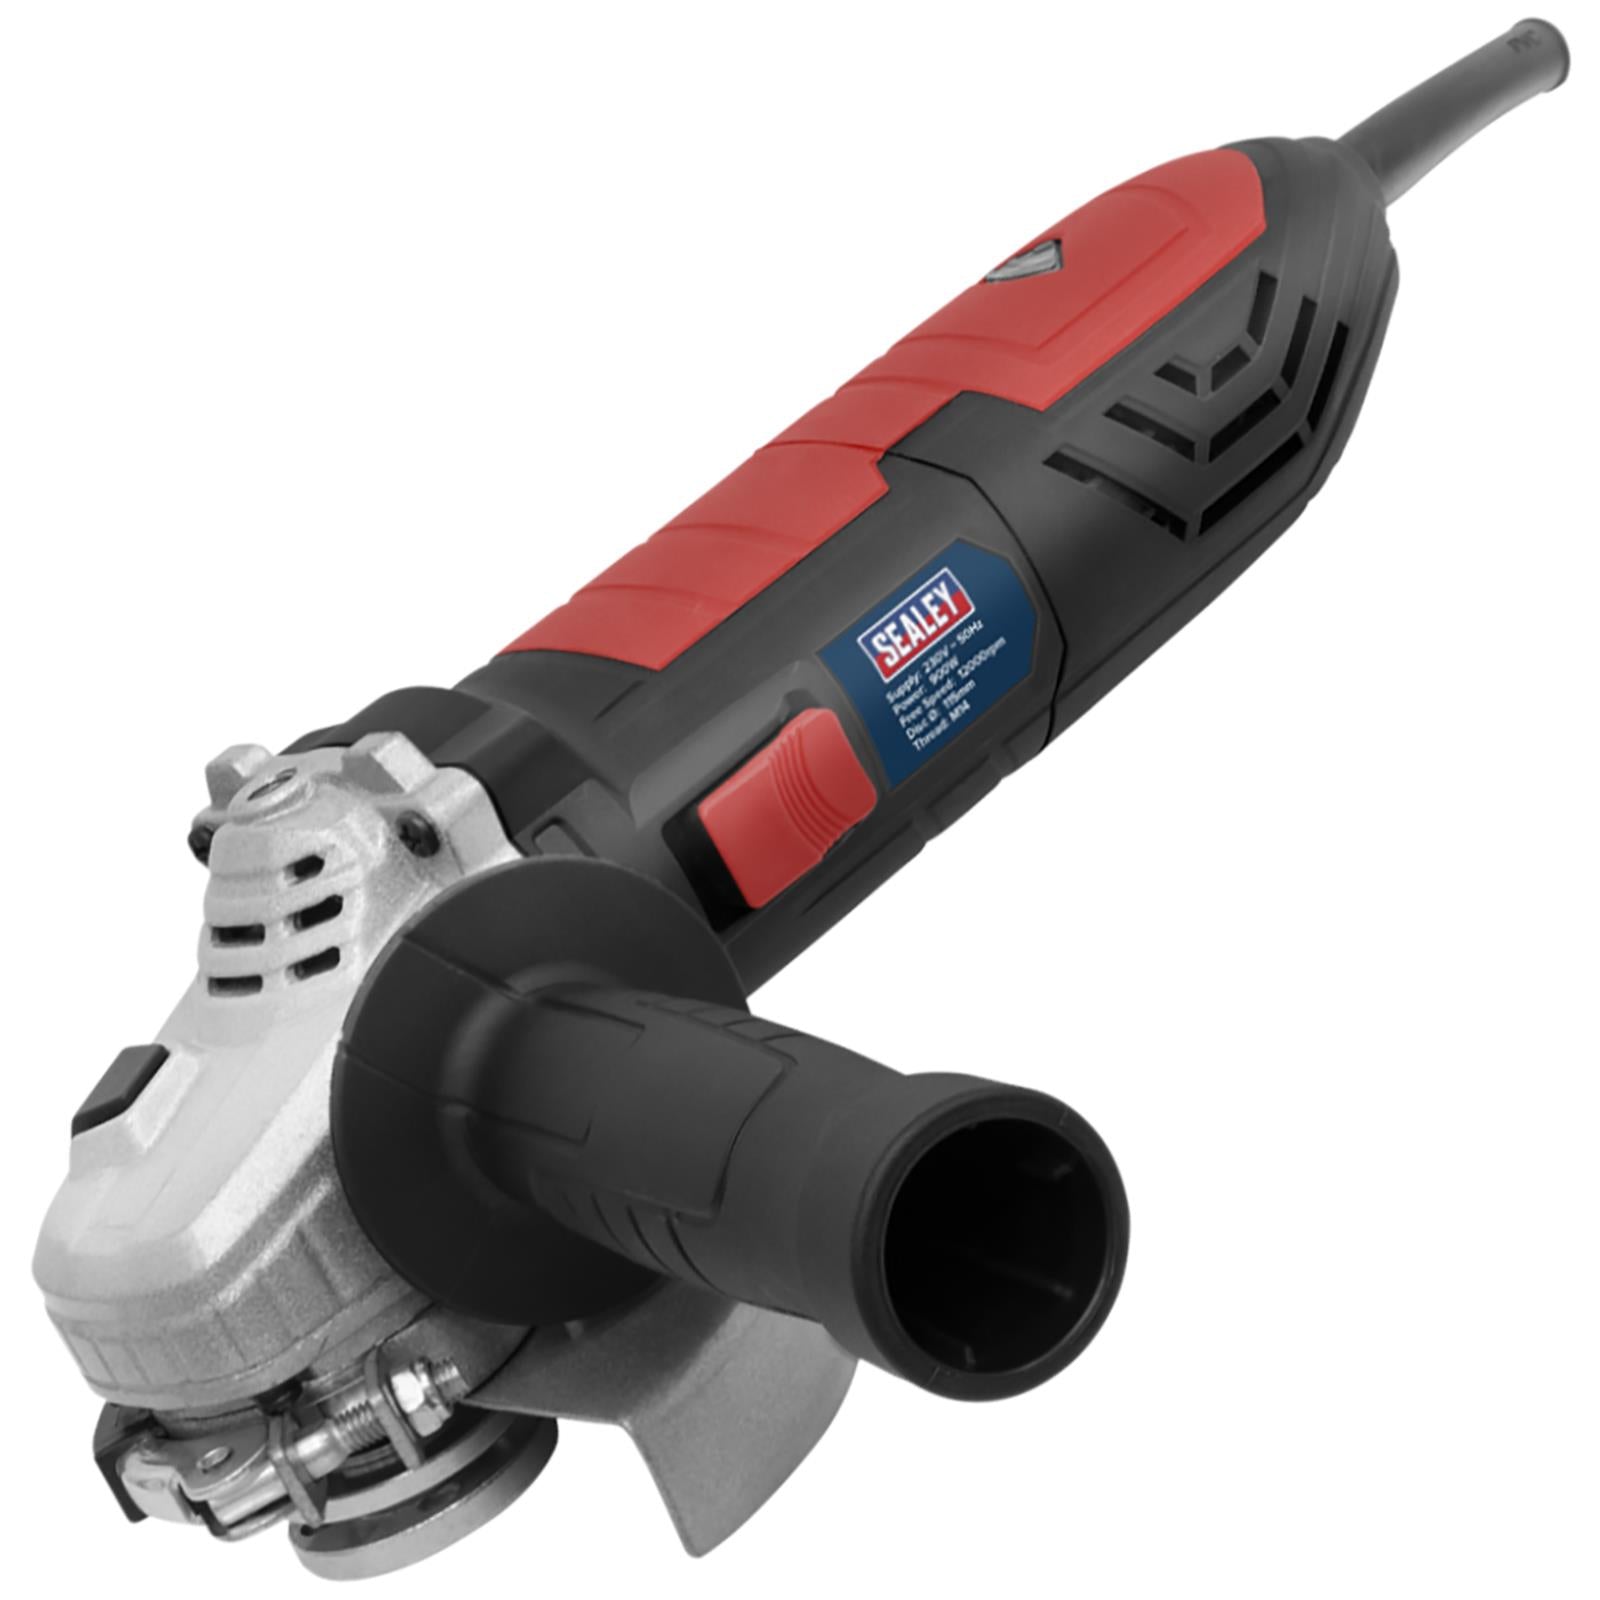 Sealey Angle Grinder 115mm 900W 230V with Side Handle Trade Use